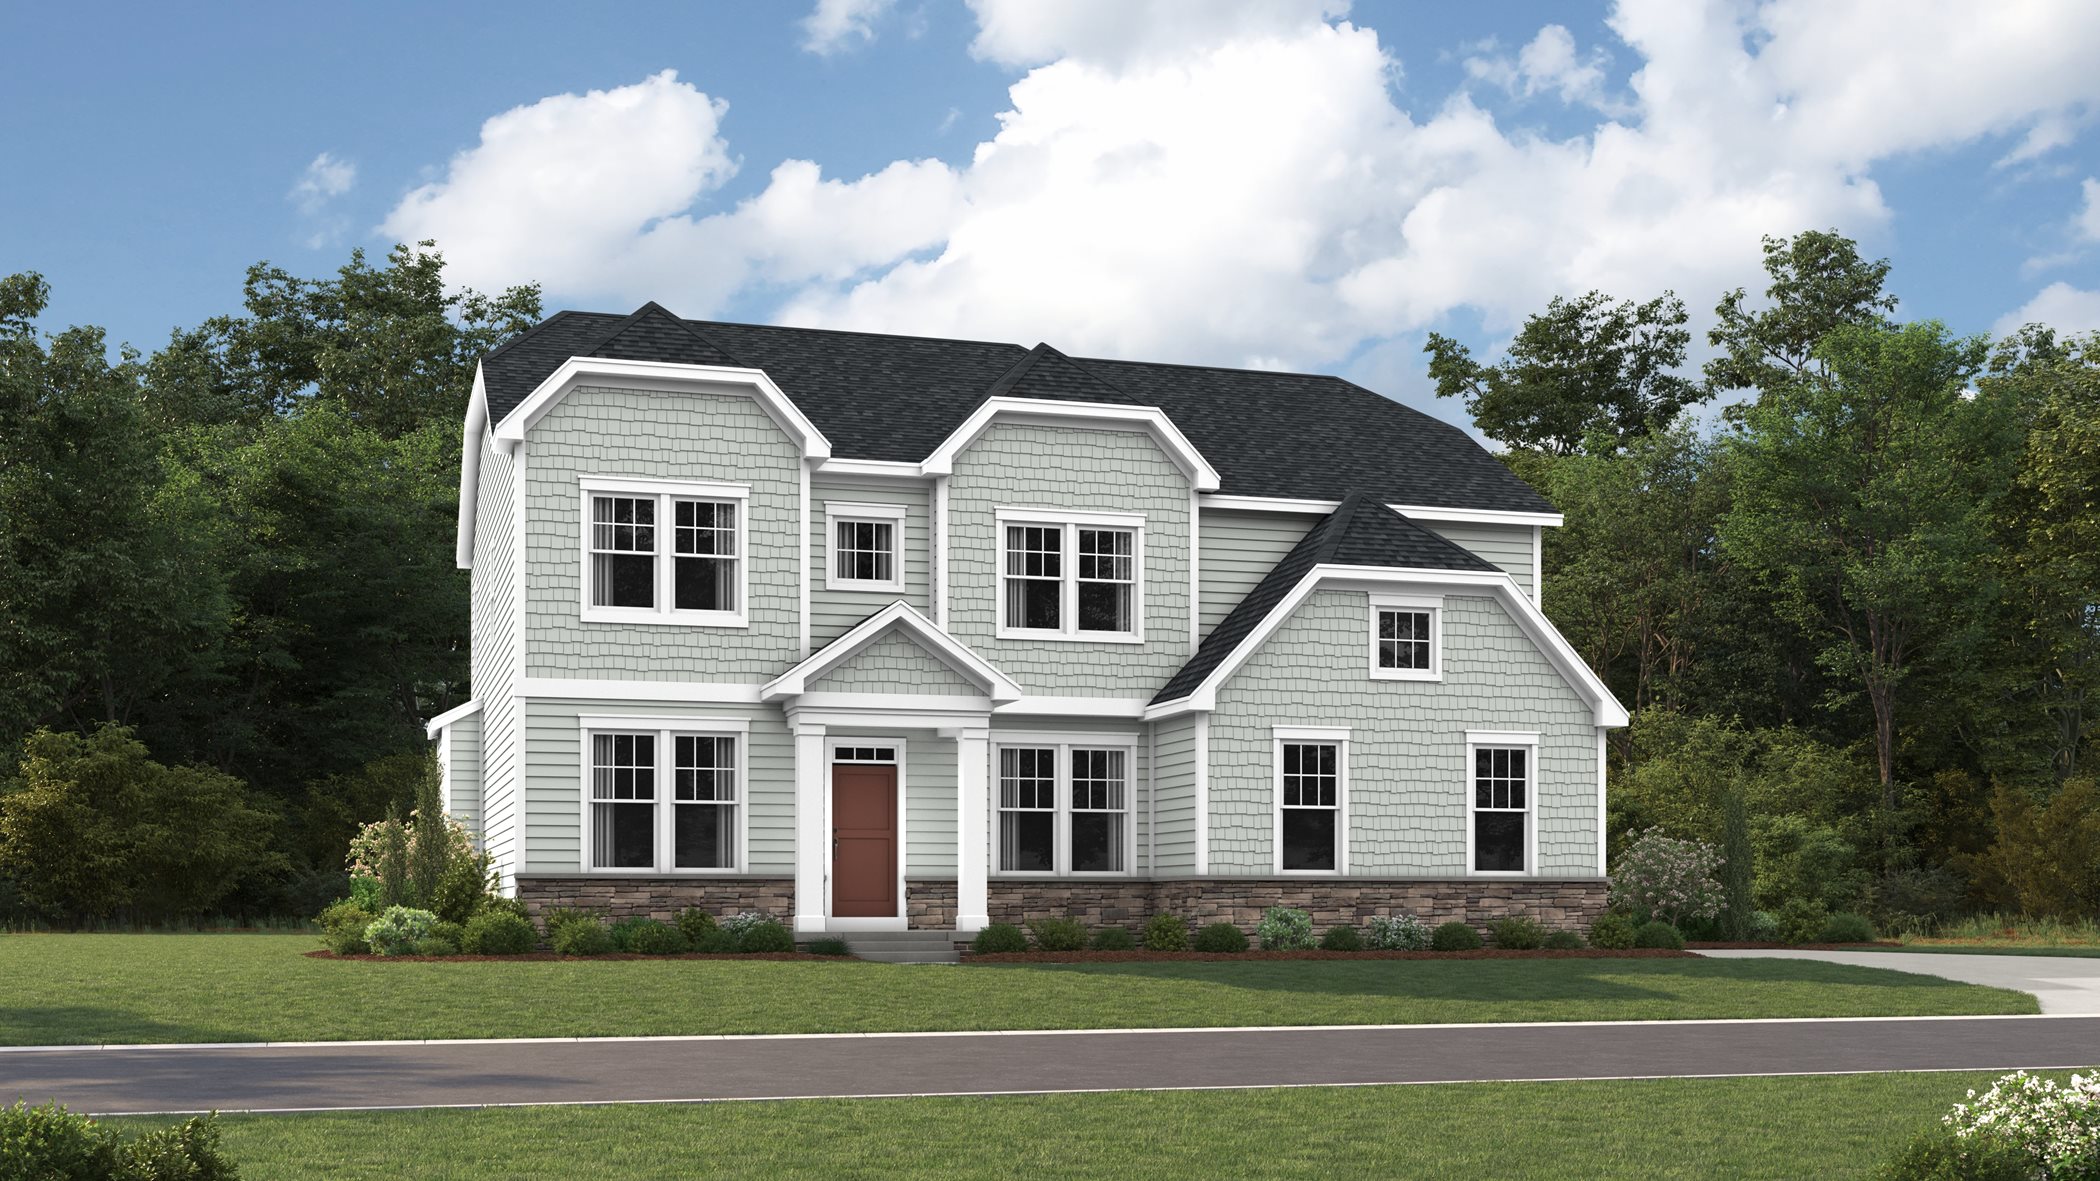 Columbia Single Family Home at Harpers Mill 